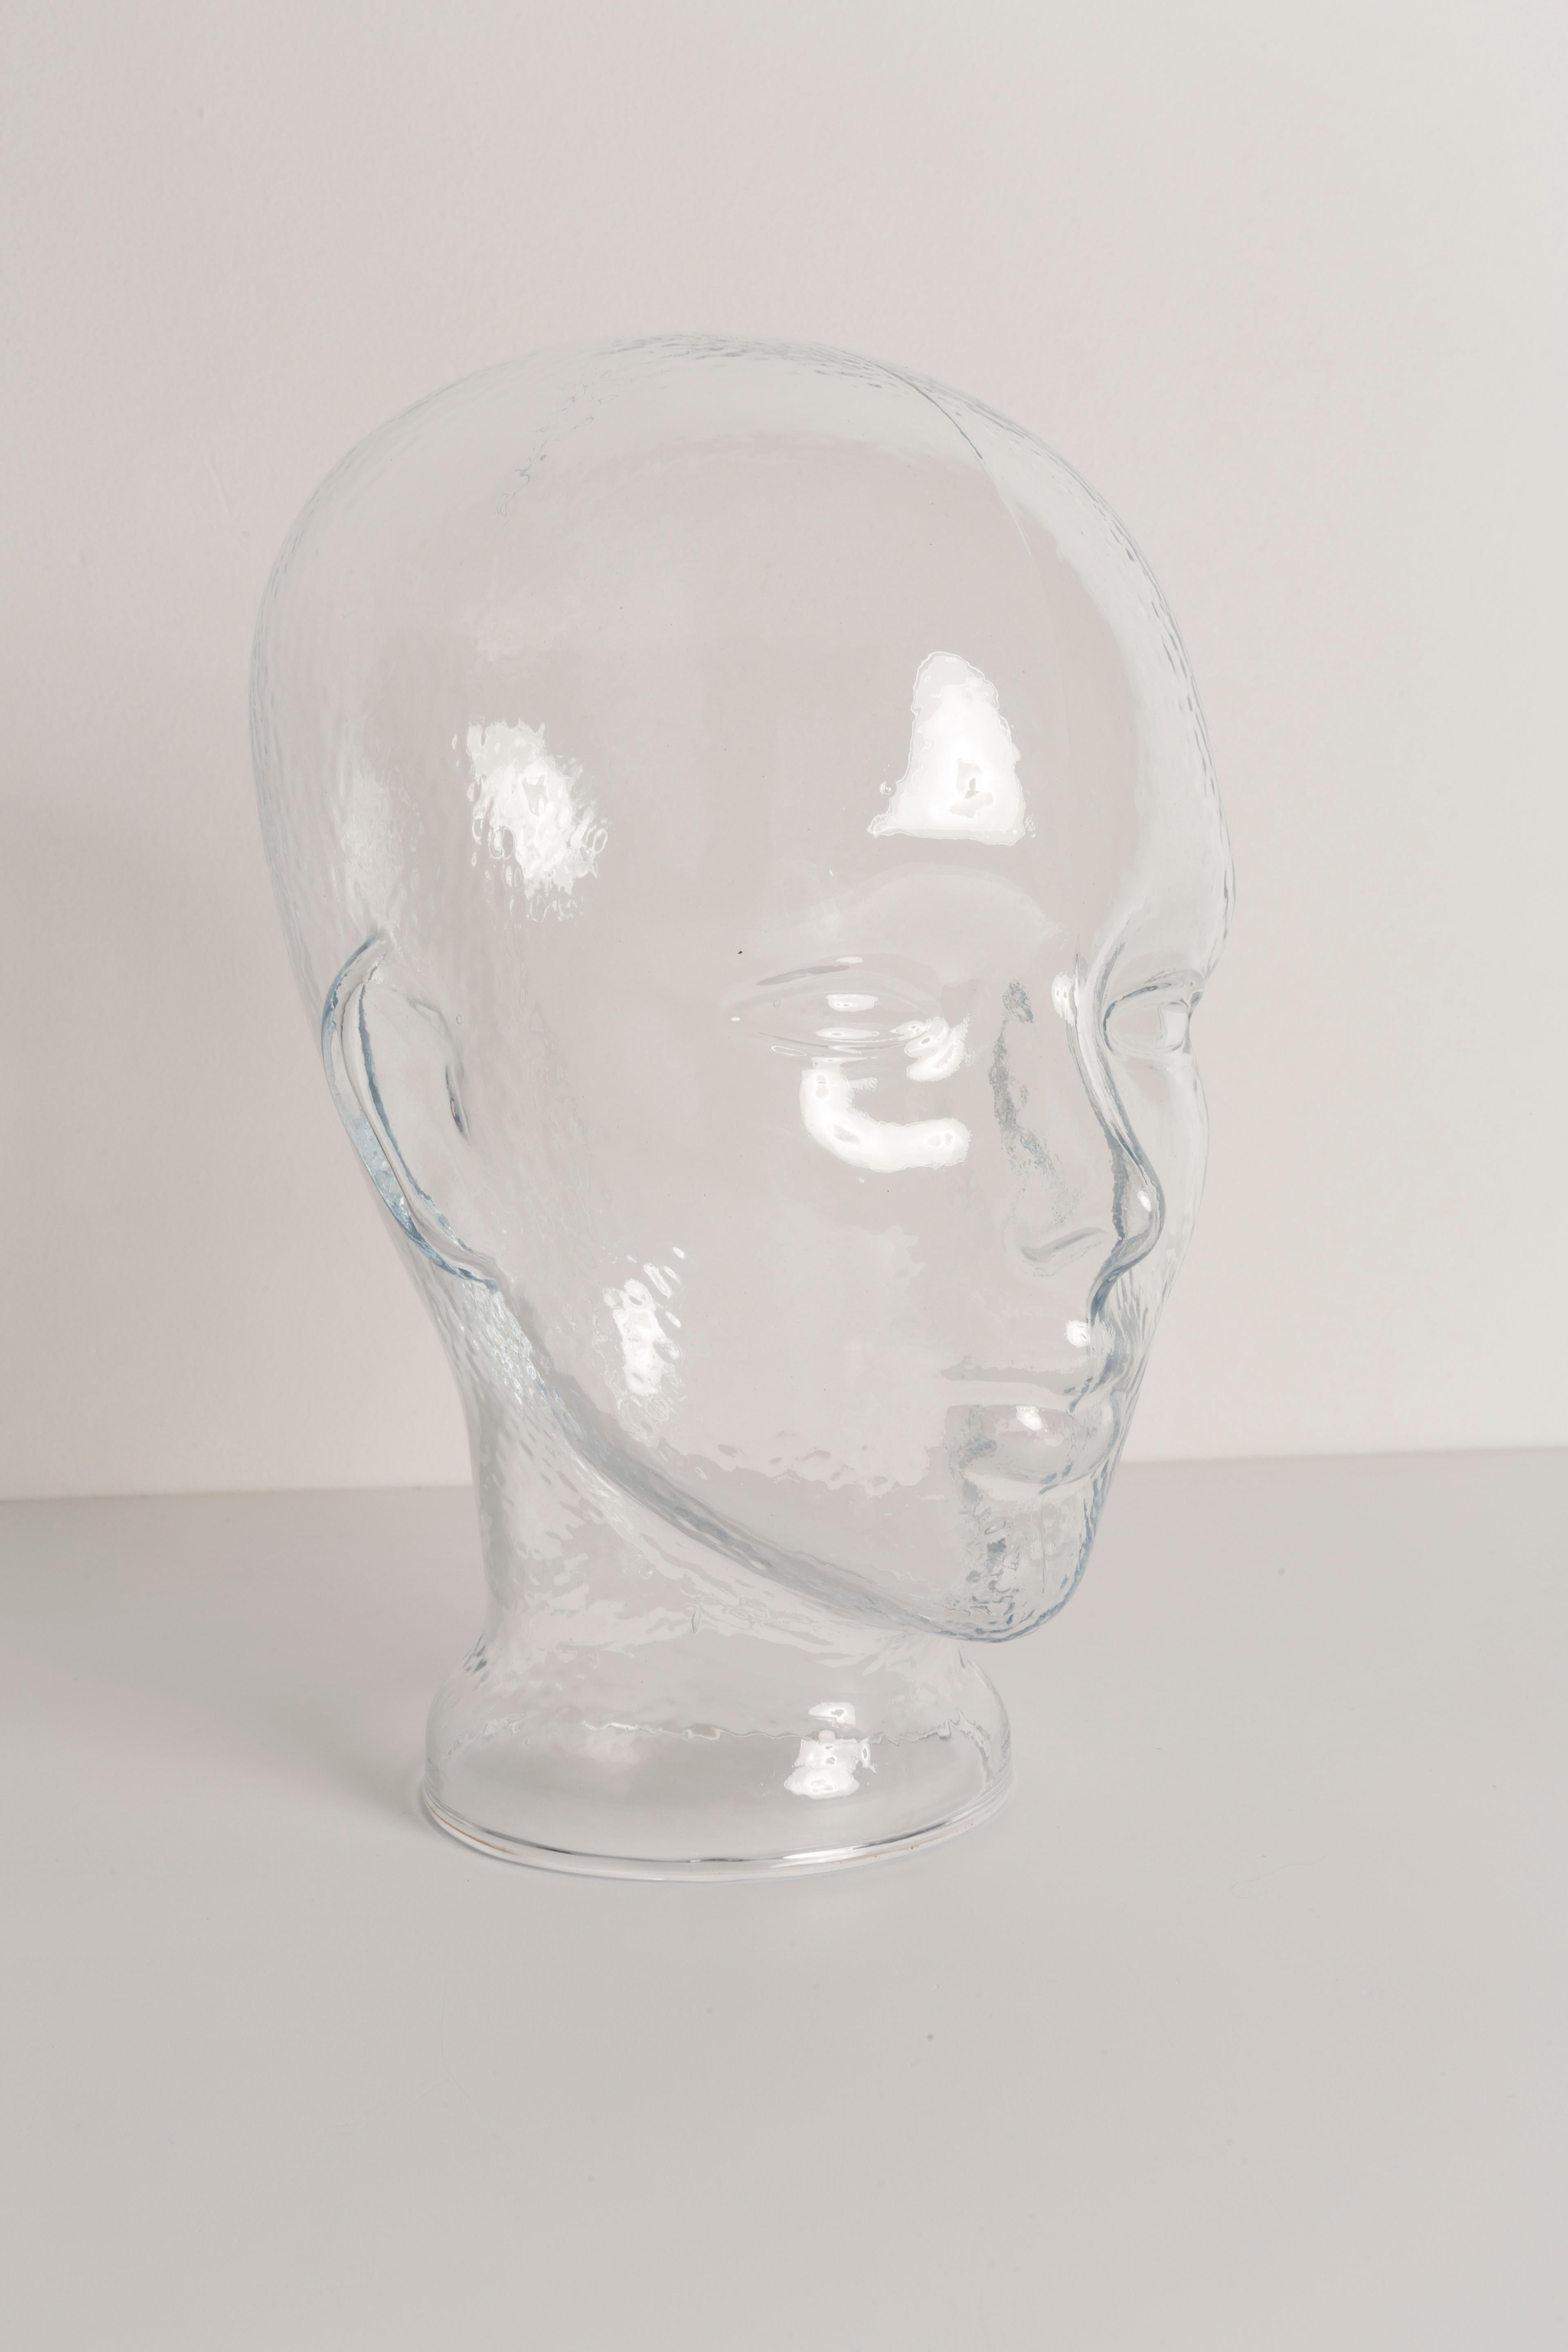 Life-size glass head in a unique transparent color. Produced in a German steelworks in the 1970s. Perfect condition. A perfect addition to the interior, photo prop, display or headphone stand.